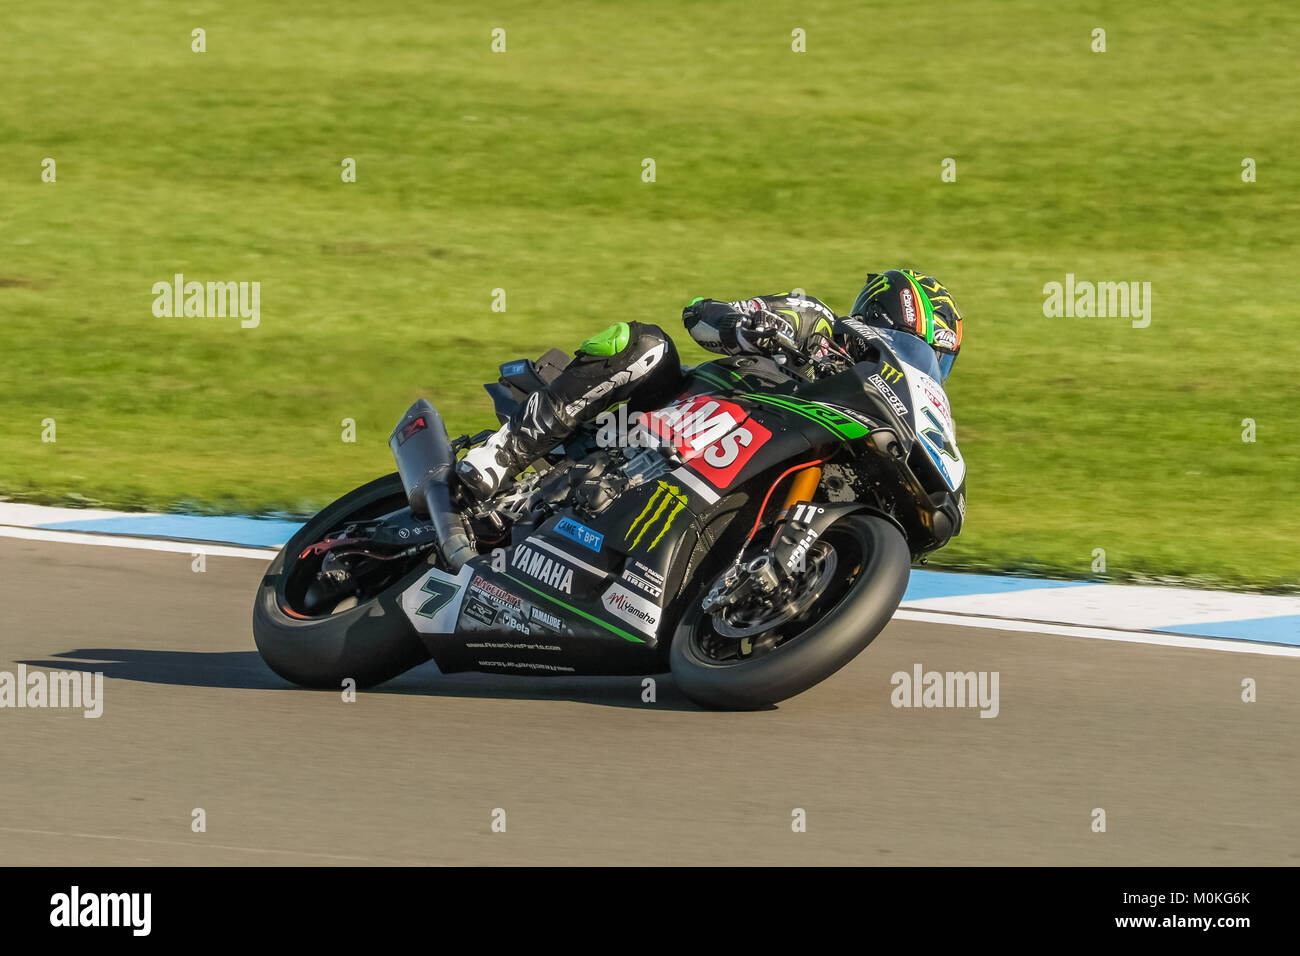 Michael Laverty on the McAms Yamaha YZF-R1 at the British Superbike Meeting at Donington Park, Castle Donnington, Leicestershire England in April 2017 Stock Photo